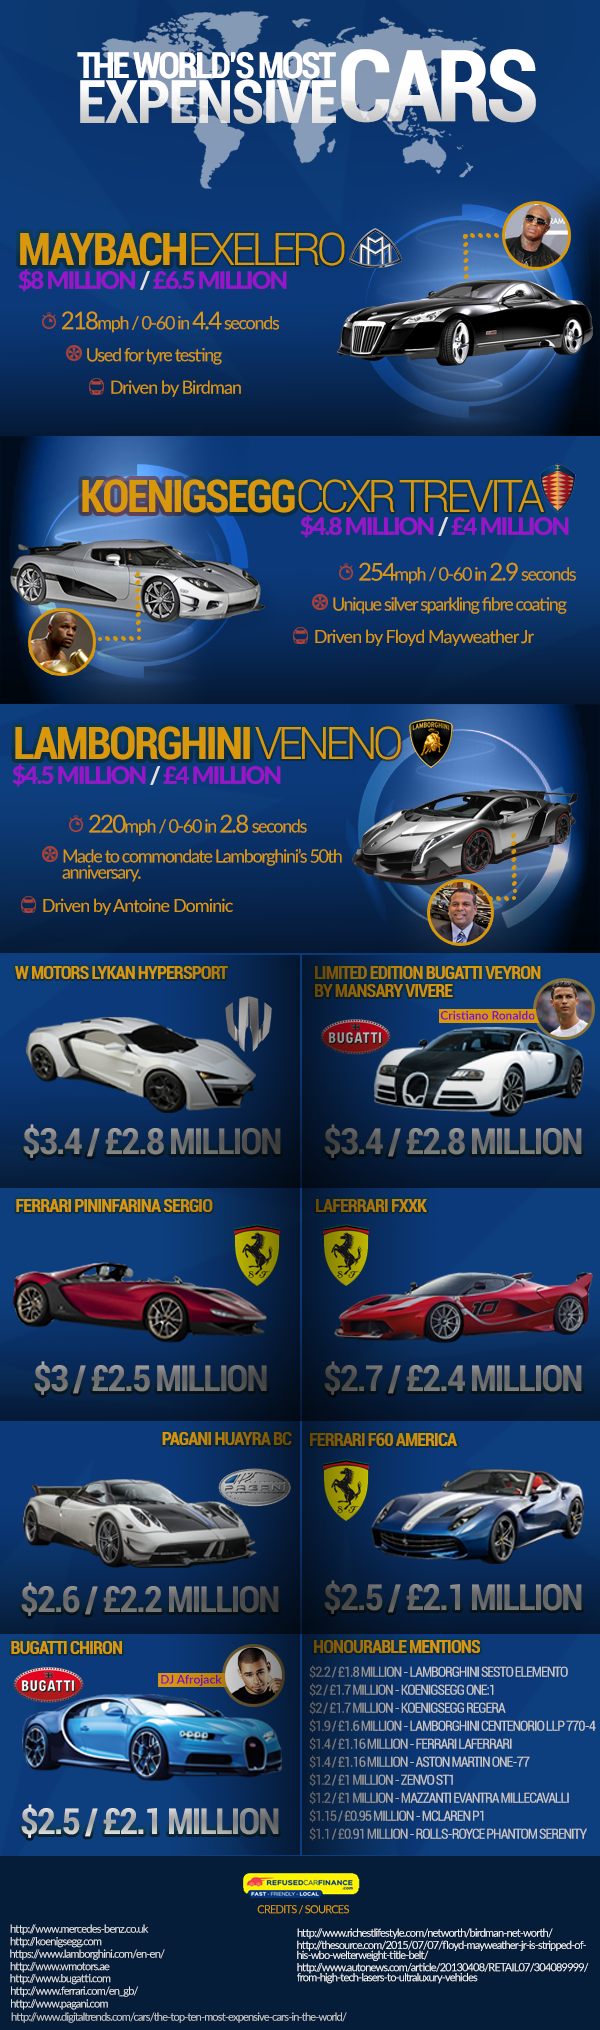 The World's most expensive cars infographic